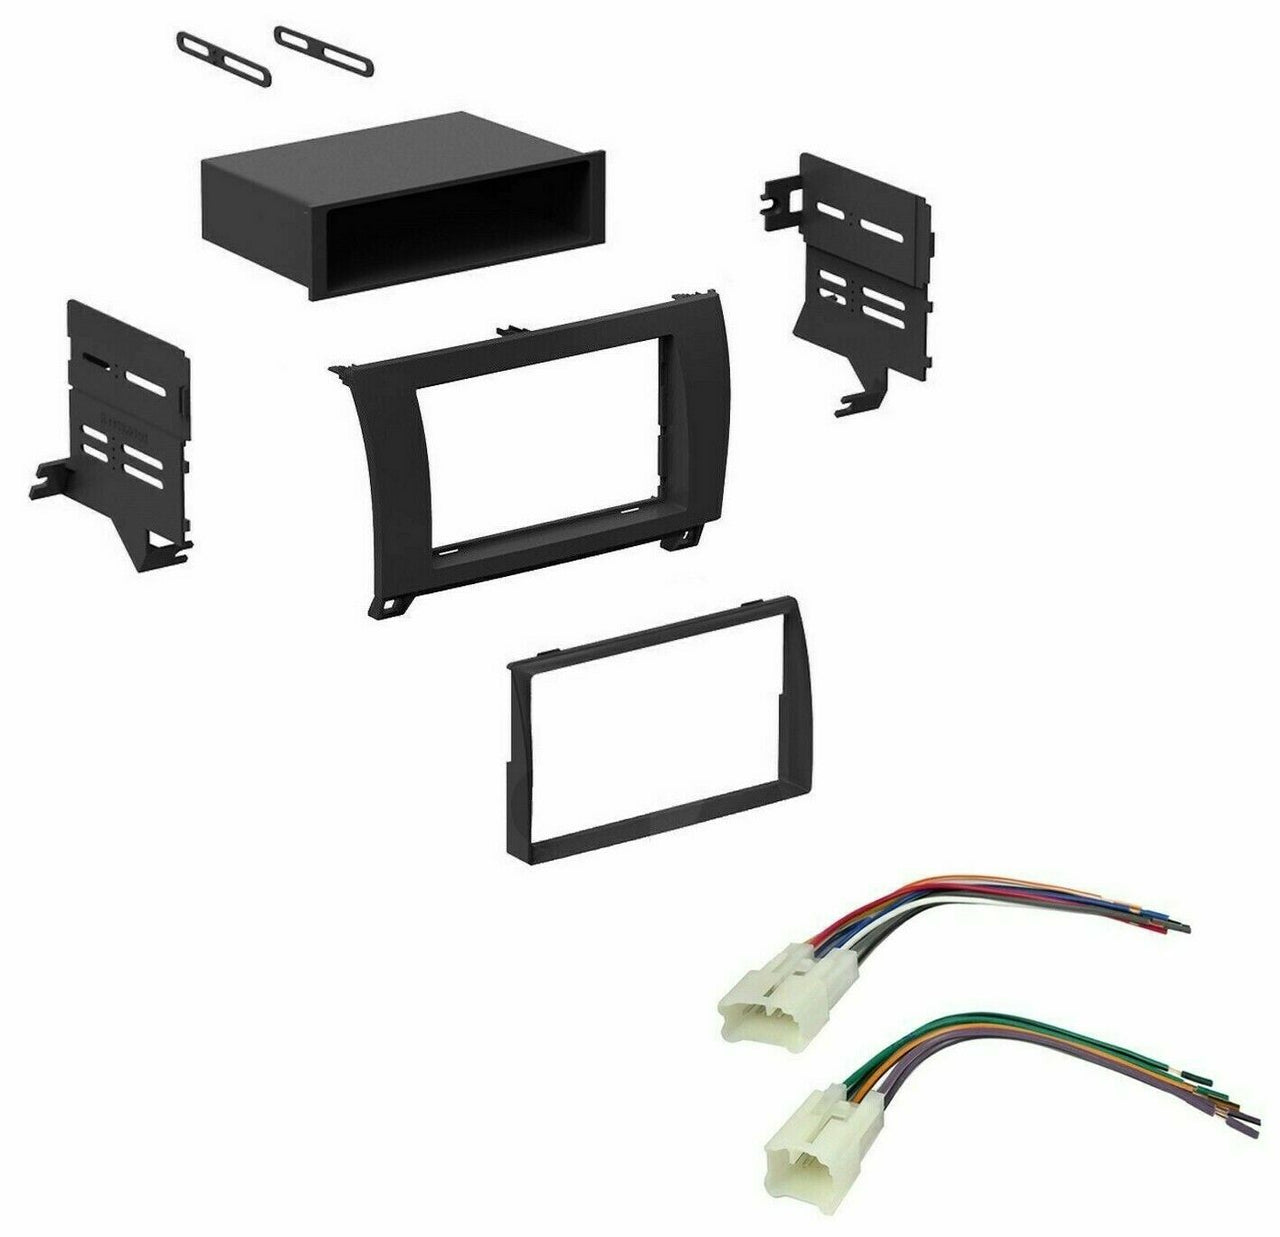 Car Double DIN Stereo Dash Kit Harness for Toyota Tundra Sequoia 2007-2012